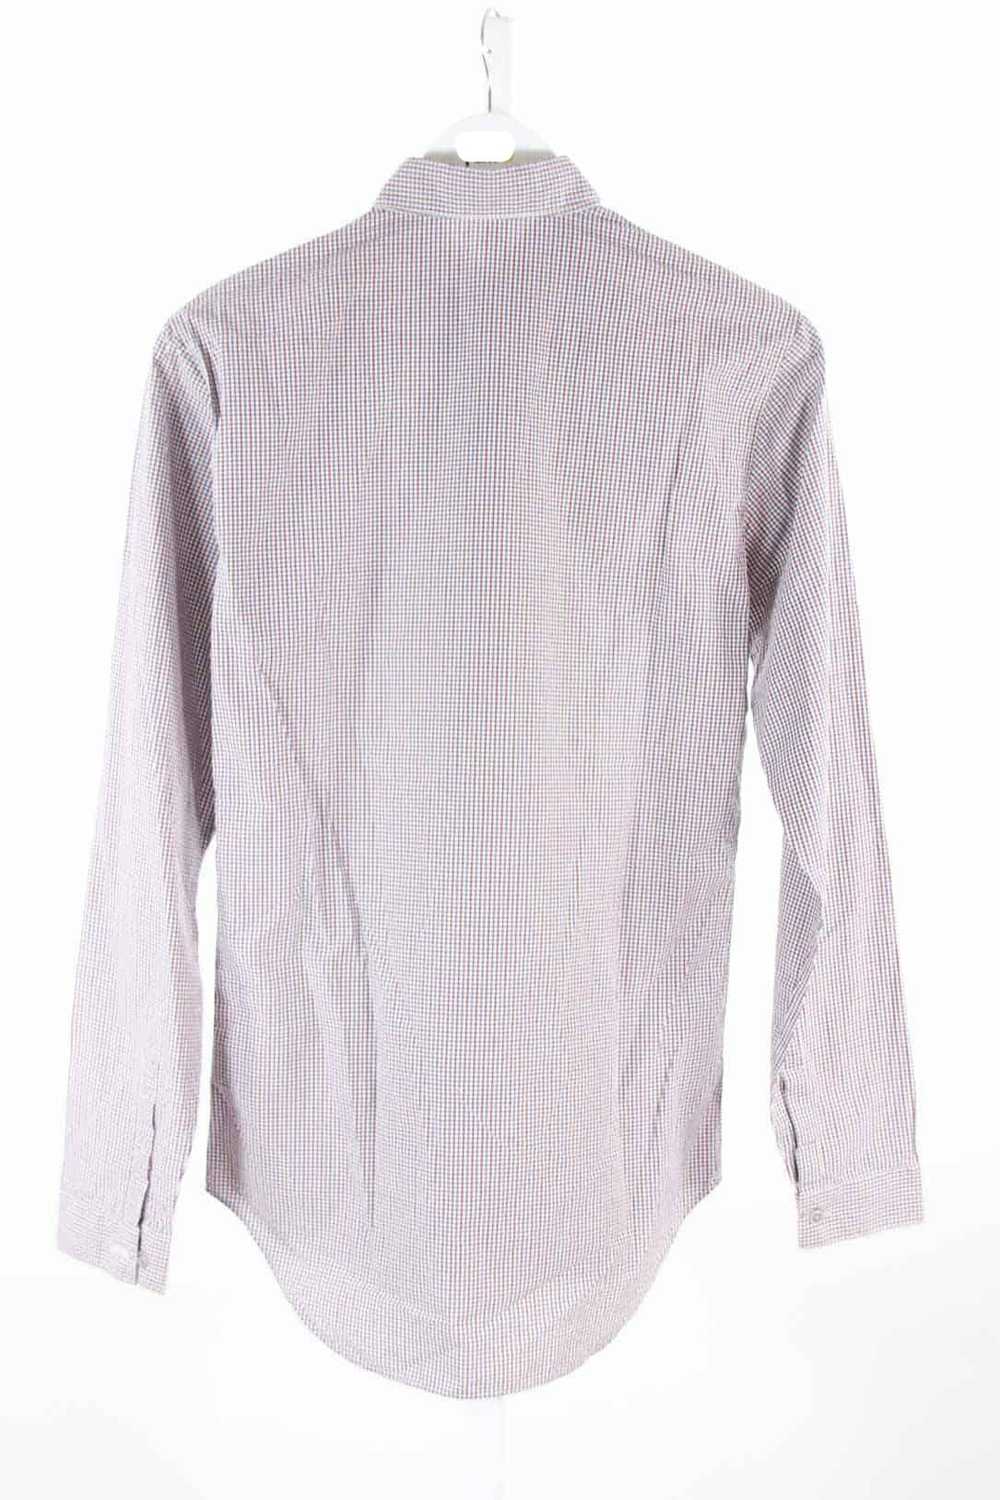 Circular Clothing HOMME Chemise Dior multicolore … - image 3